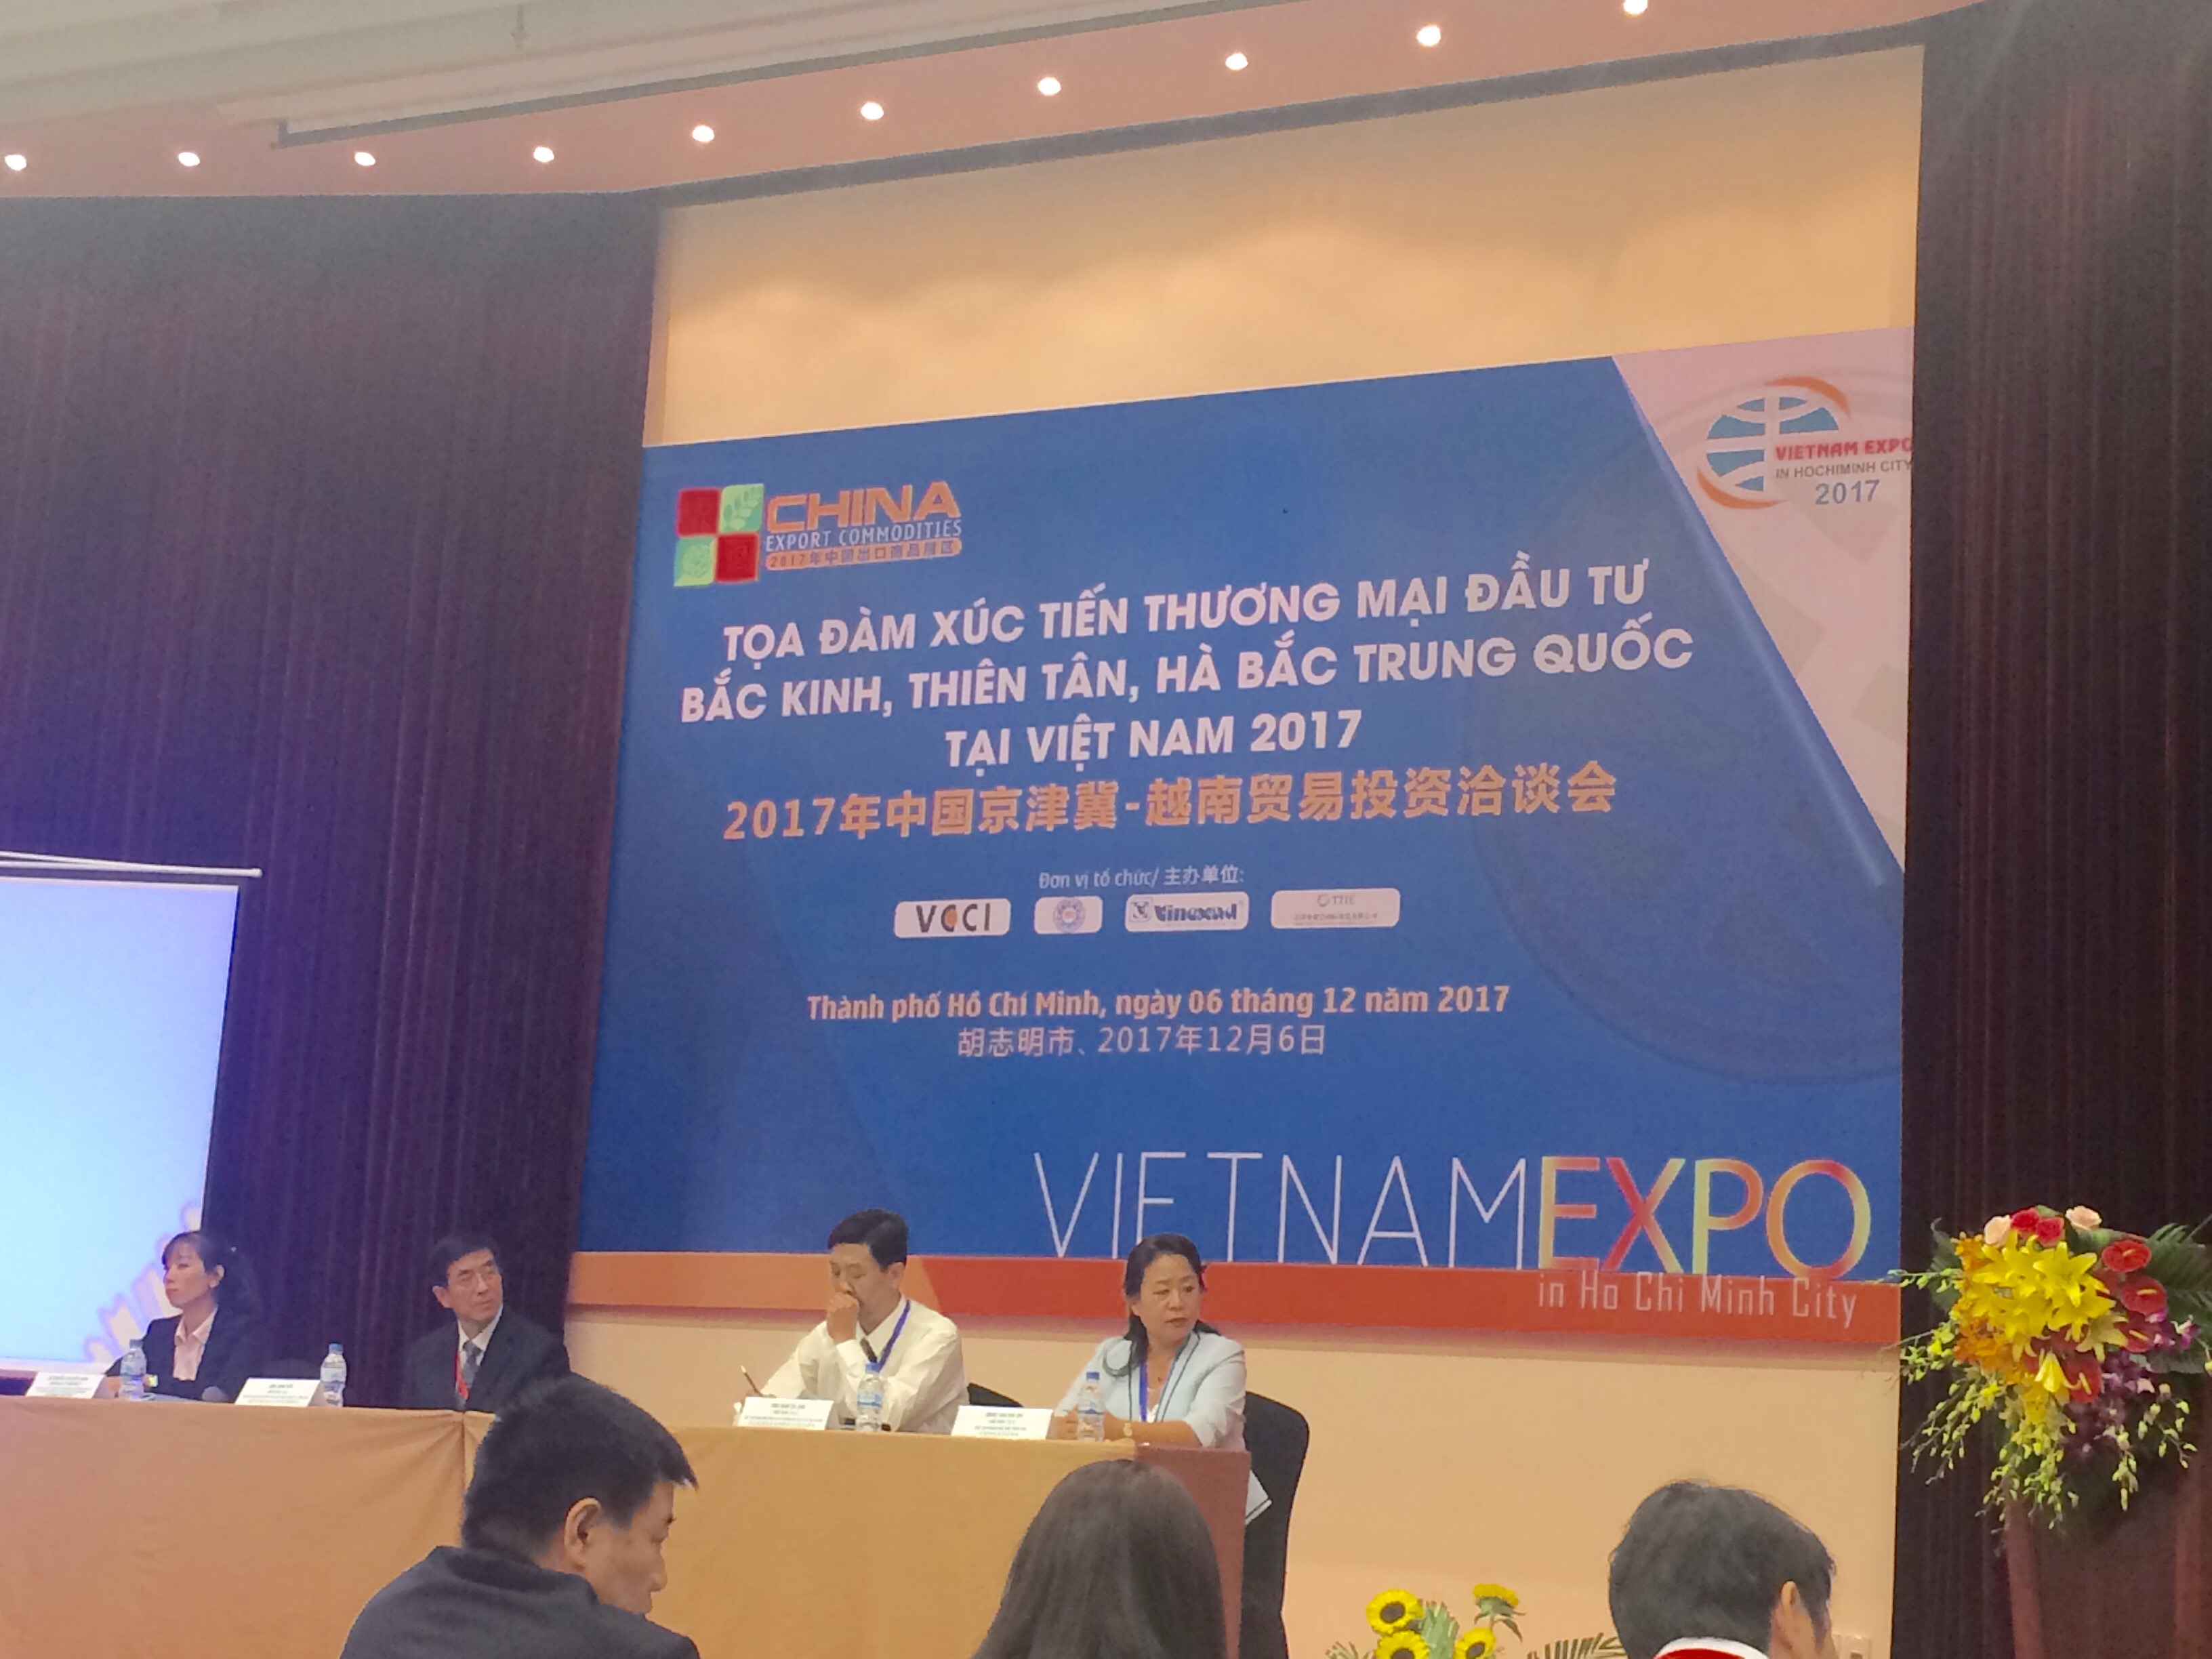 More Chinese investors to relocate manufacturing to Vietnam